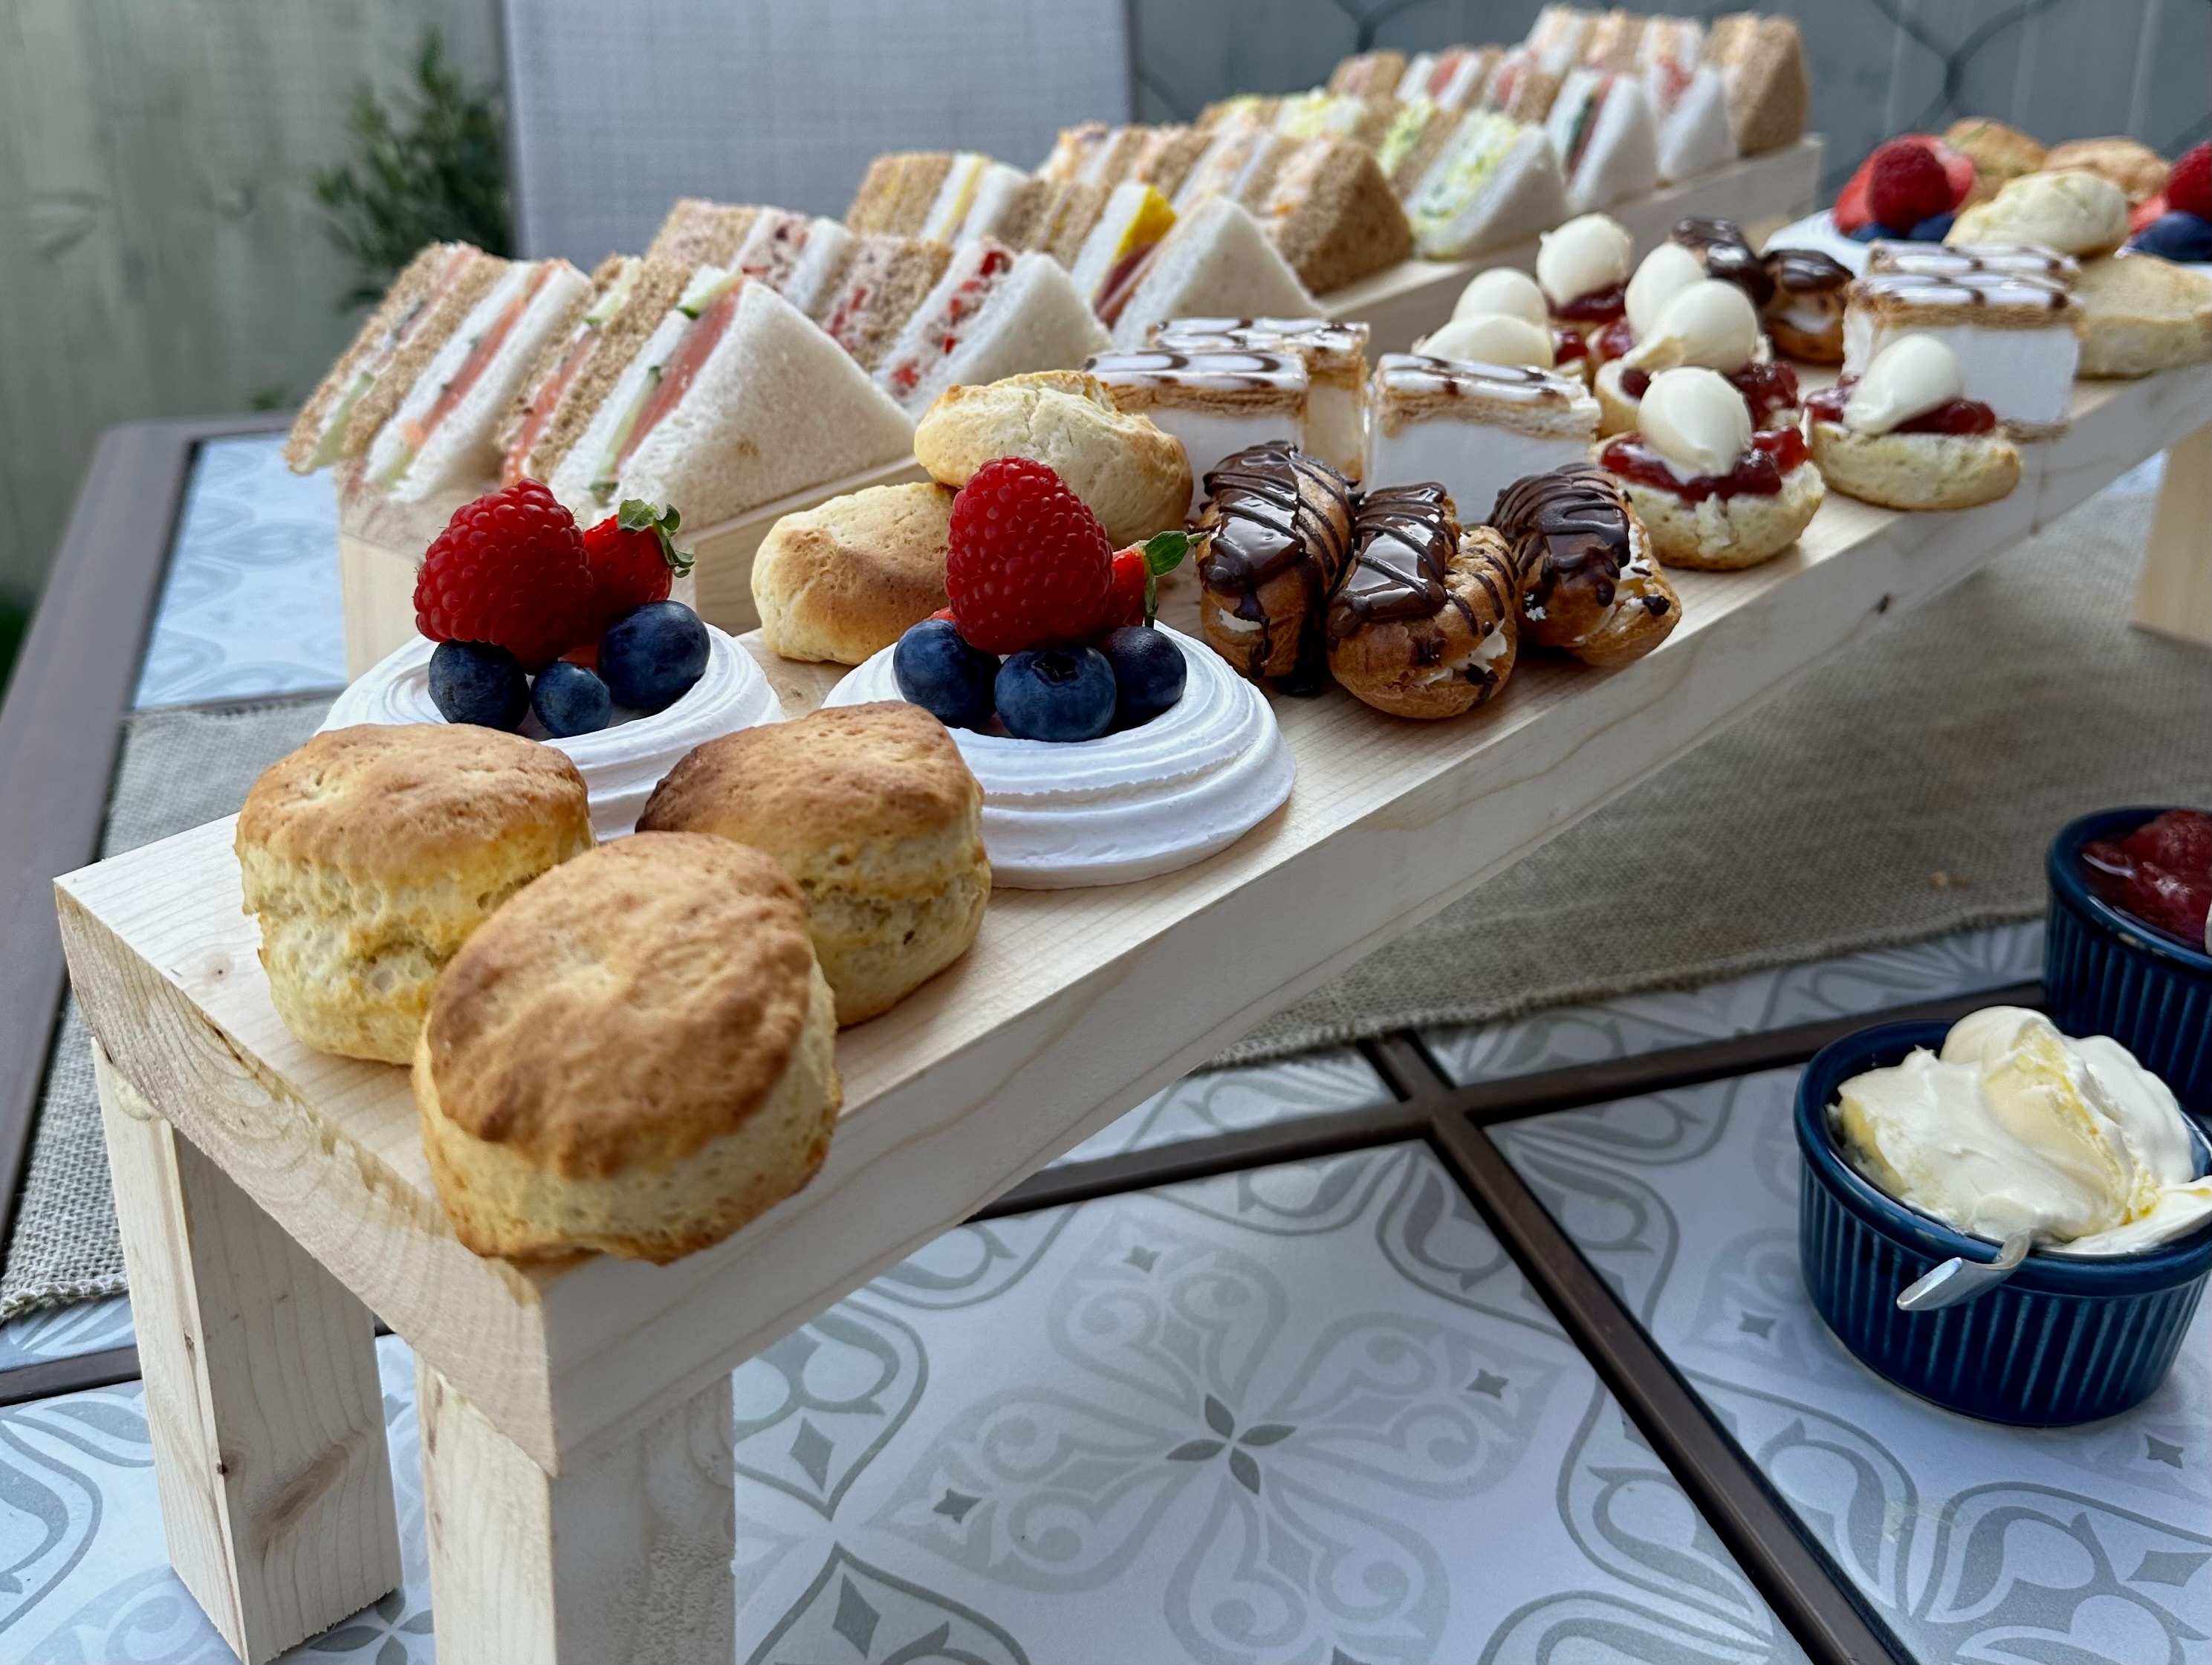 Handcrafted Rustic Traditional British Afternoon Tea